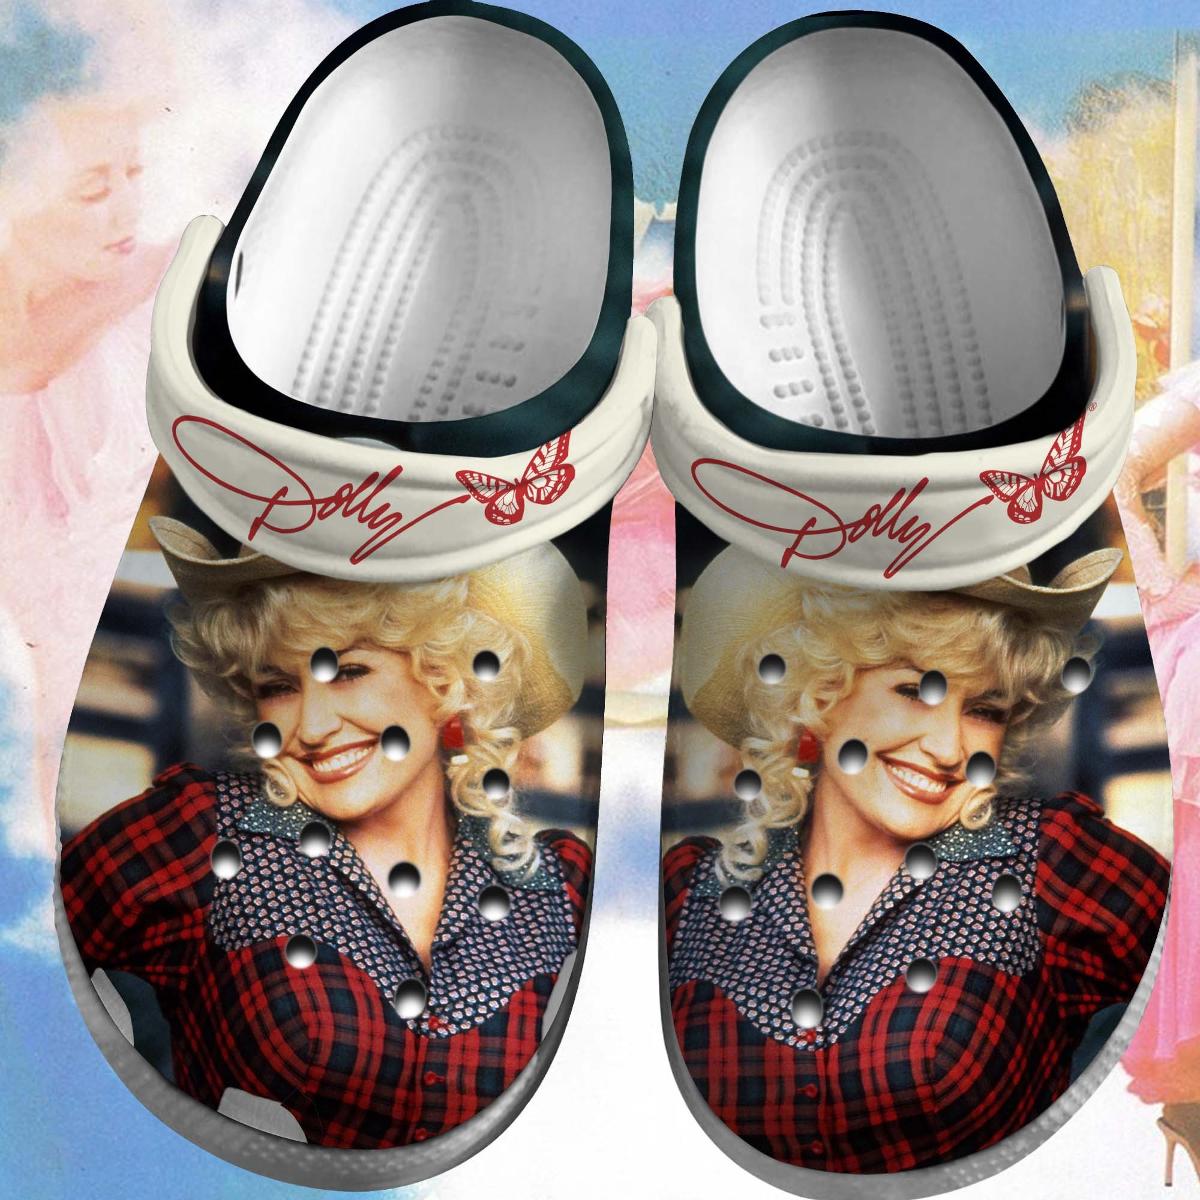 Dolly Parton Crocs For Men Women And Kids